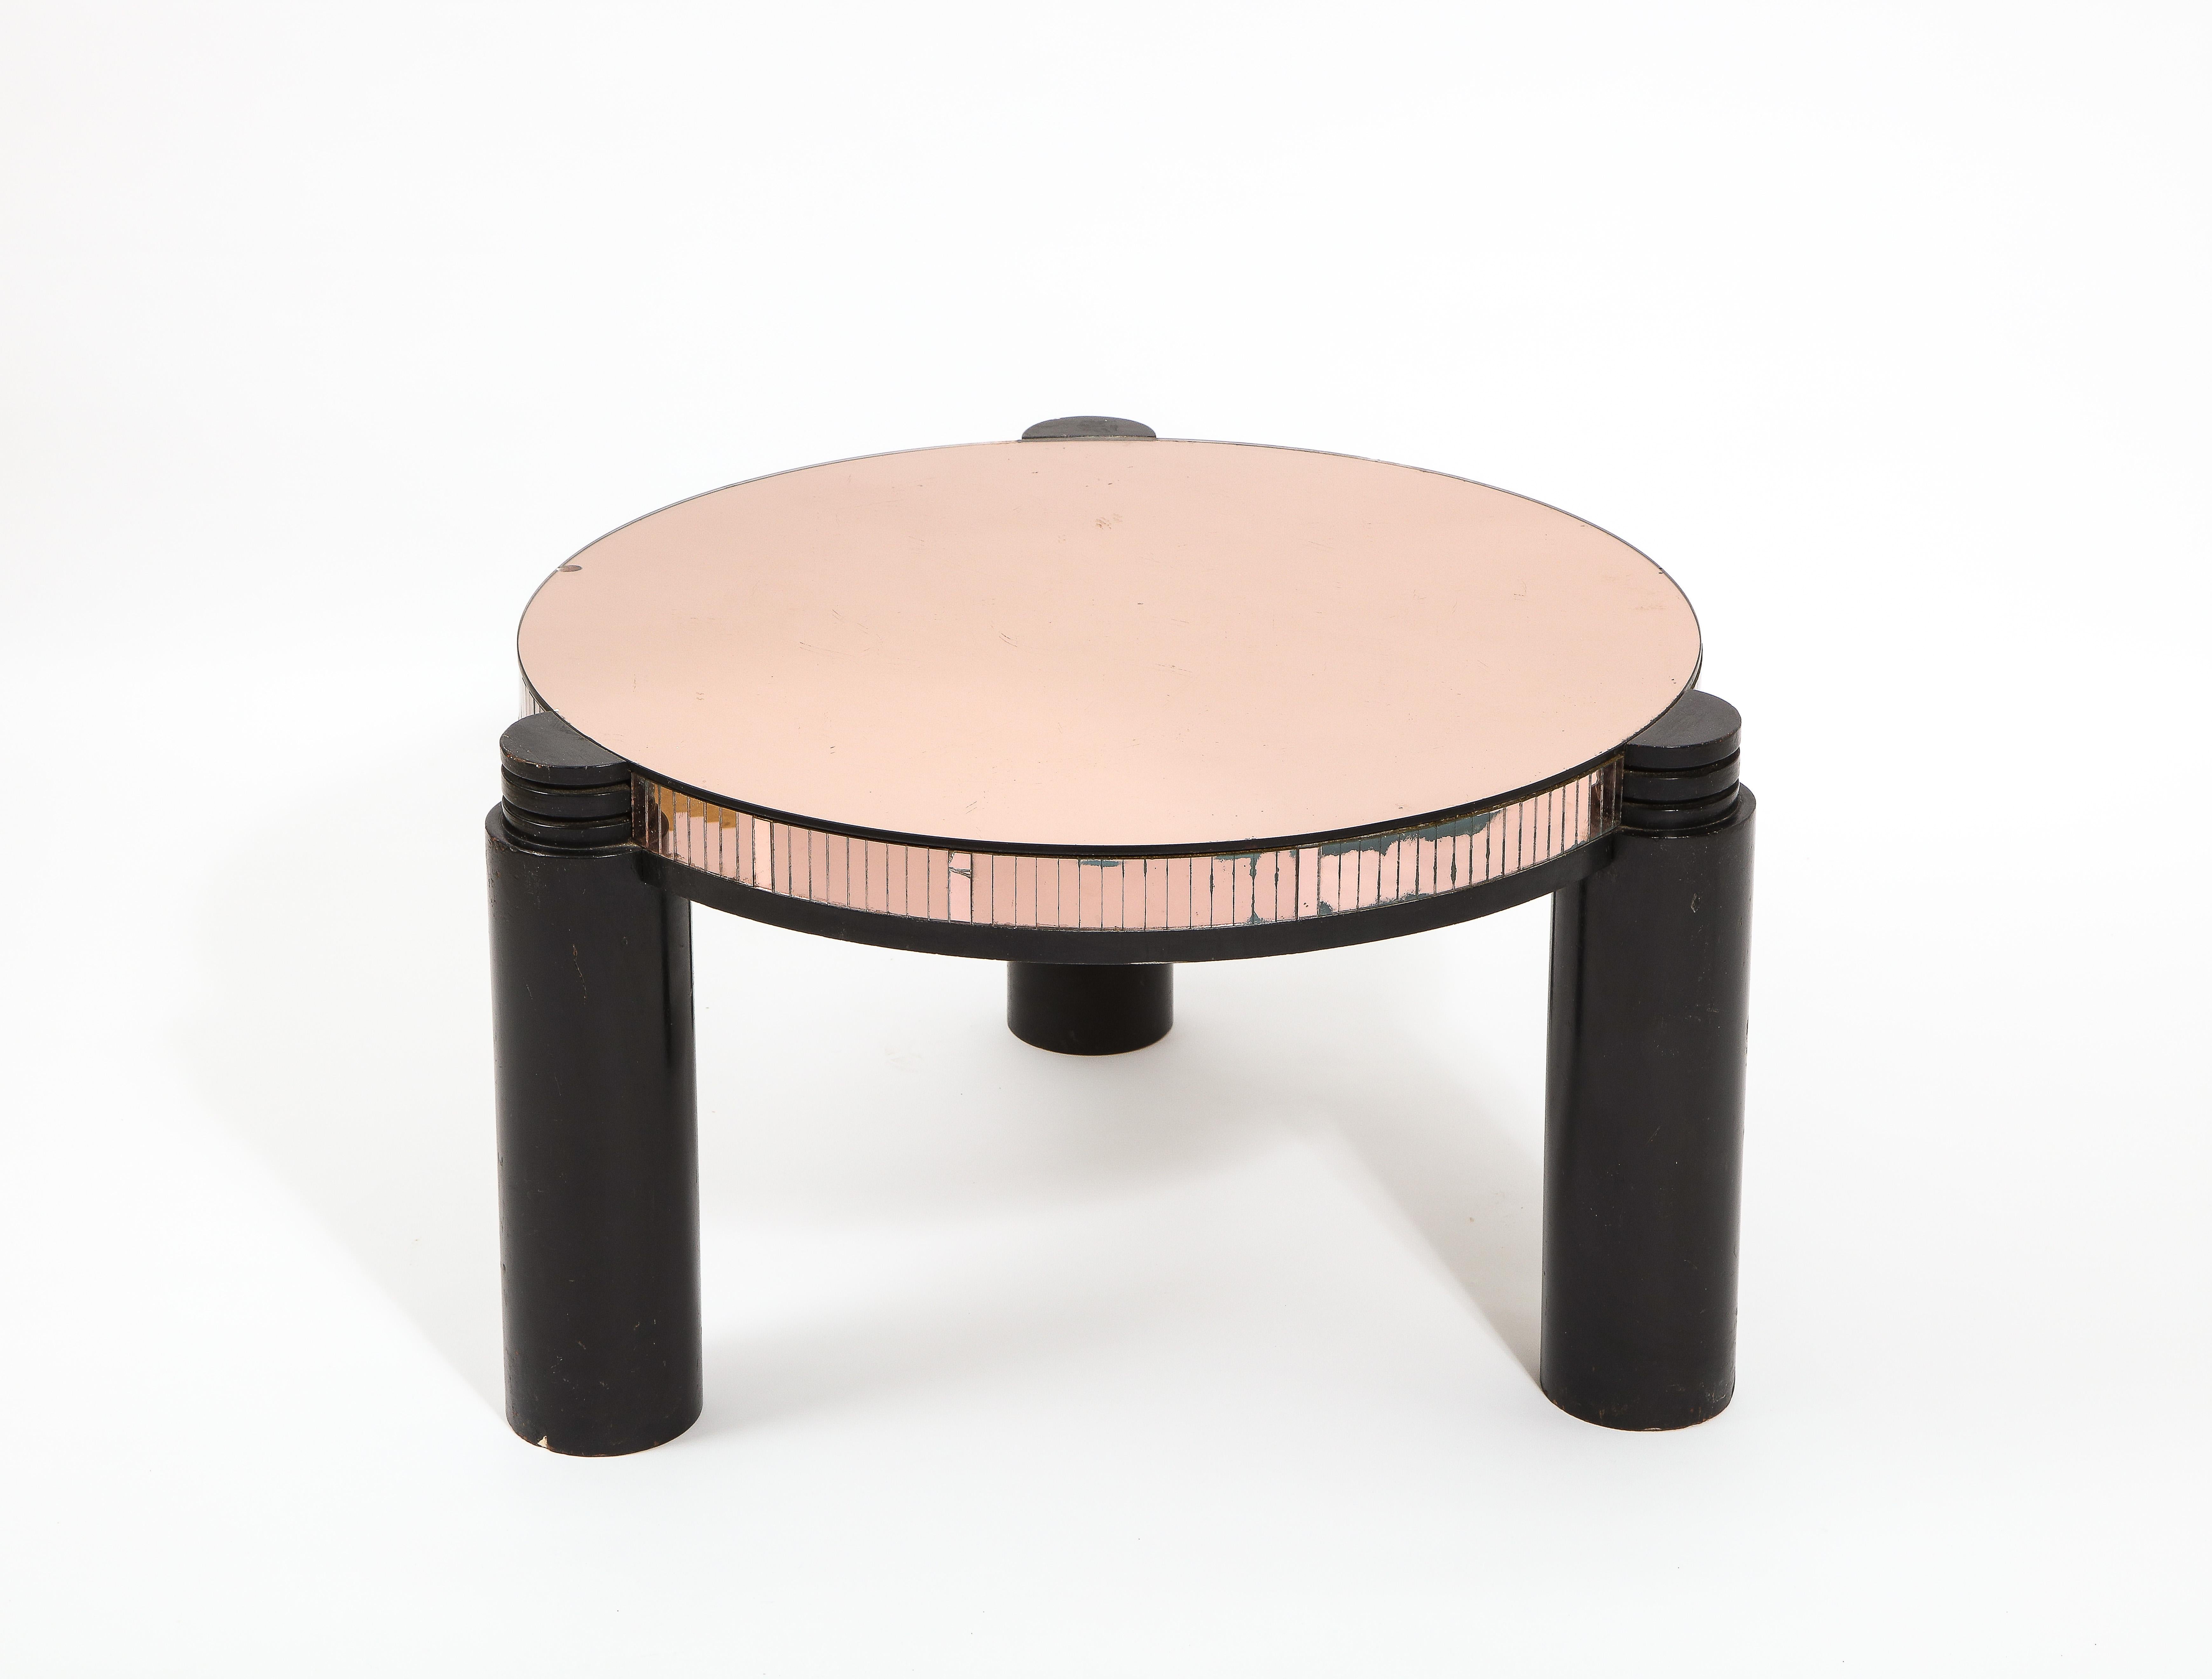 Black Ebonized & Pink Mirror Round Deco Style Cocktail Table, France 1940's In Good Condition For Sale In New York, NY